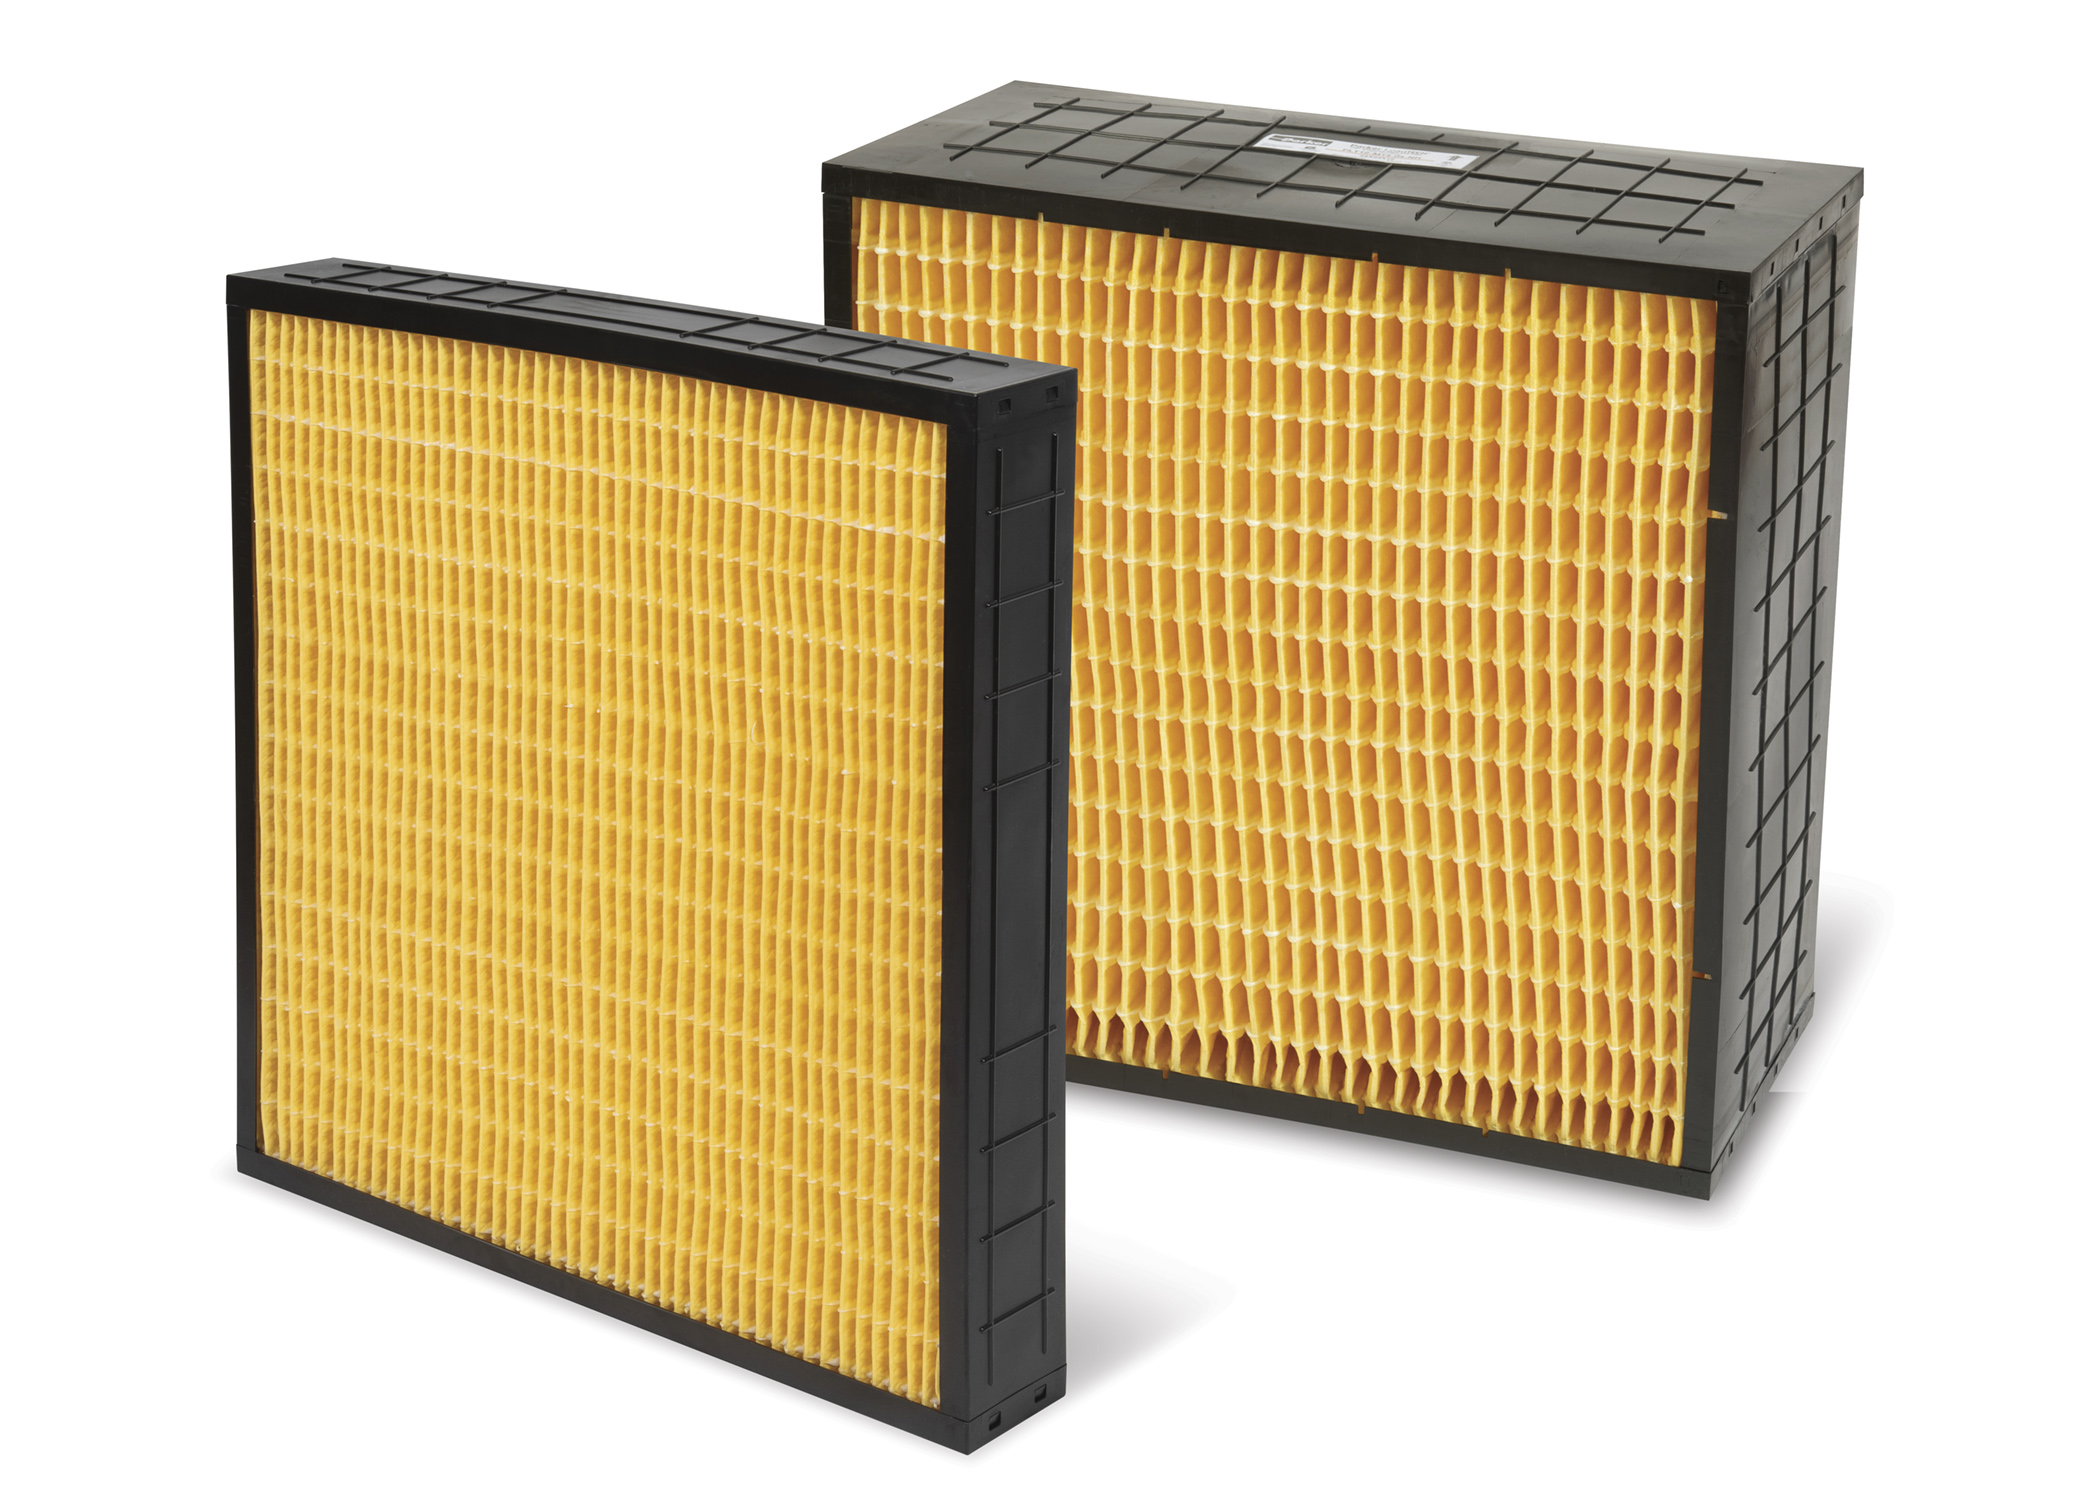 Parker LoadTECH 4 in and 12 in filters are designed for variable air volume commercial HVAC systems.